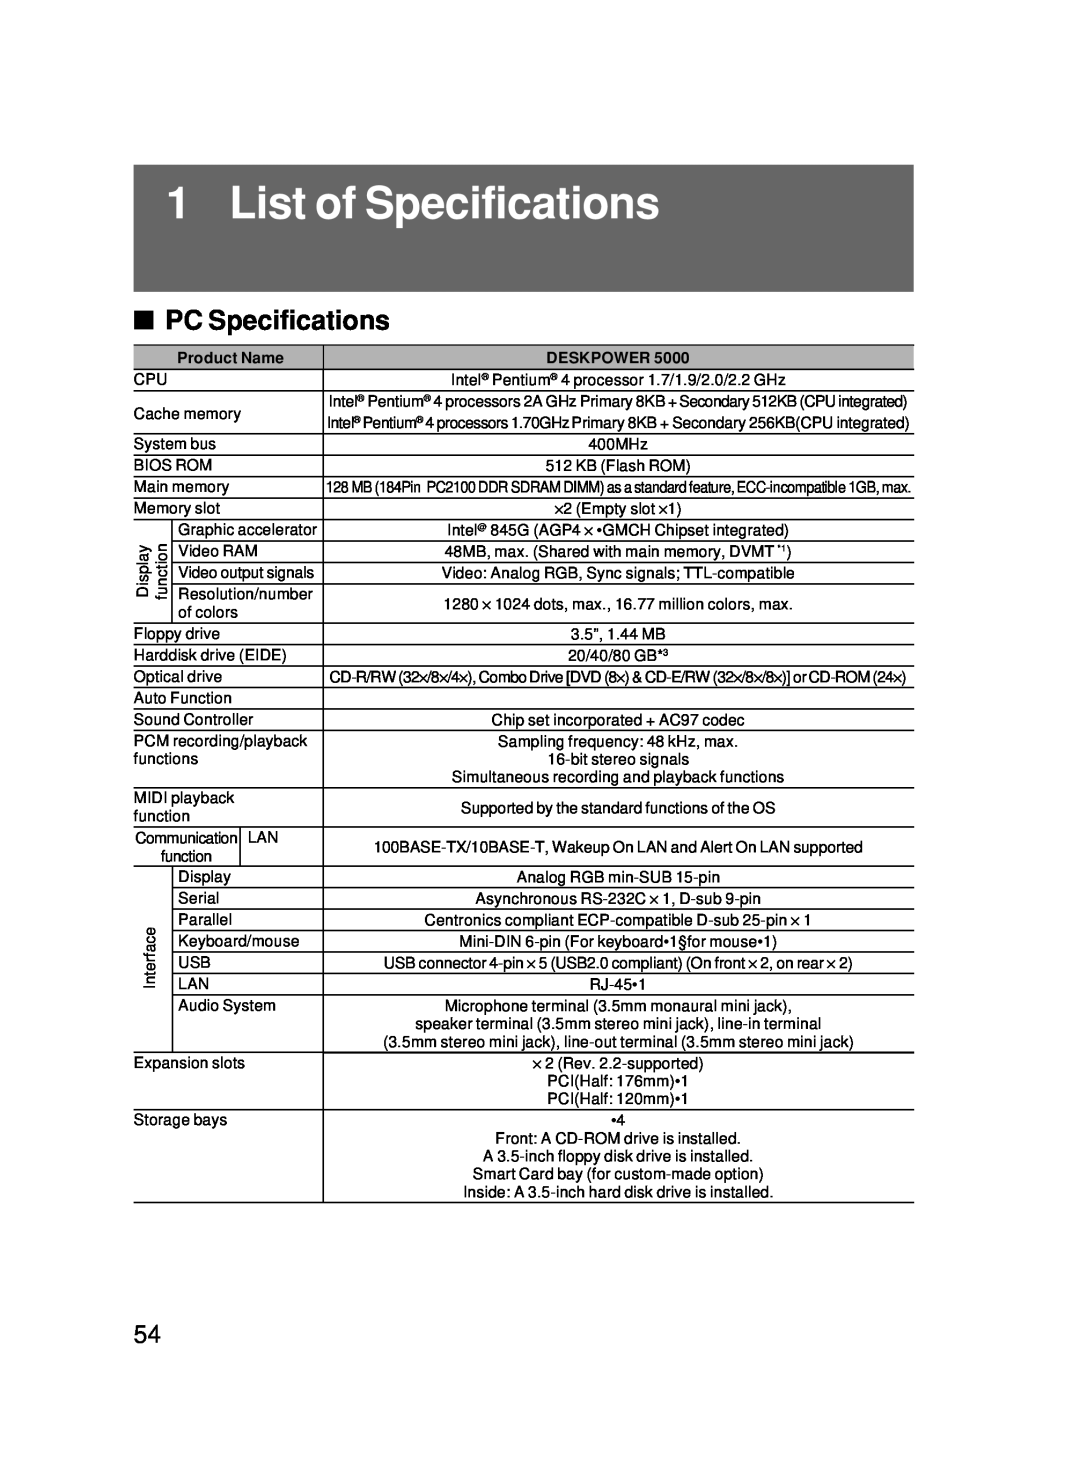 Fujitsu 5000 user manual List of Specifications, PC Specifications 